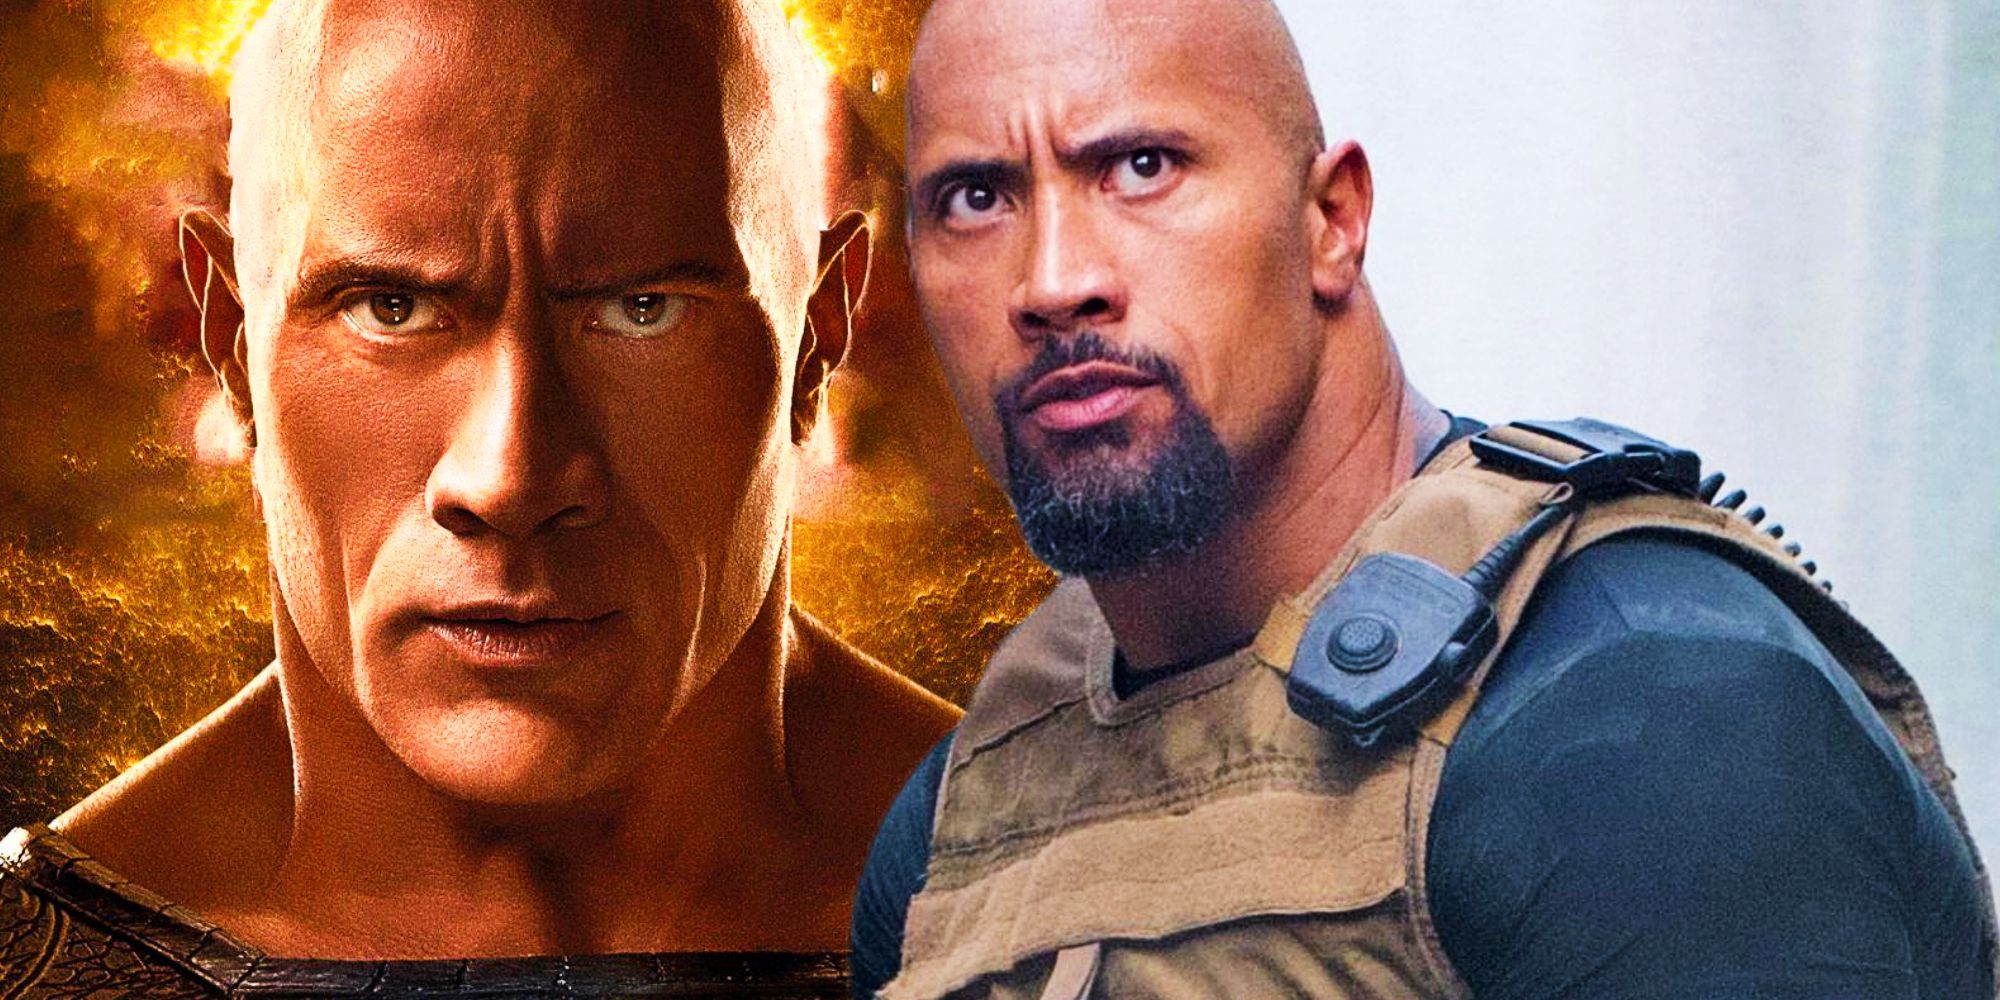 Dwayne Johnson as Black Adam and Fast and Furious Hobbs